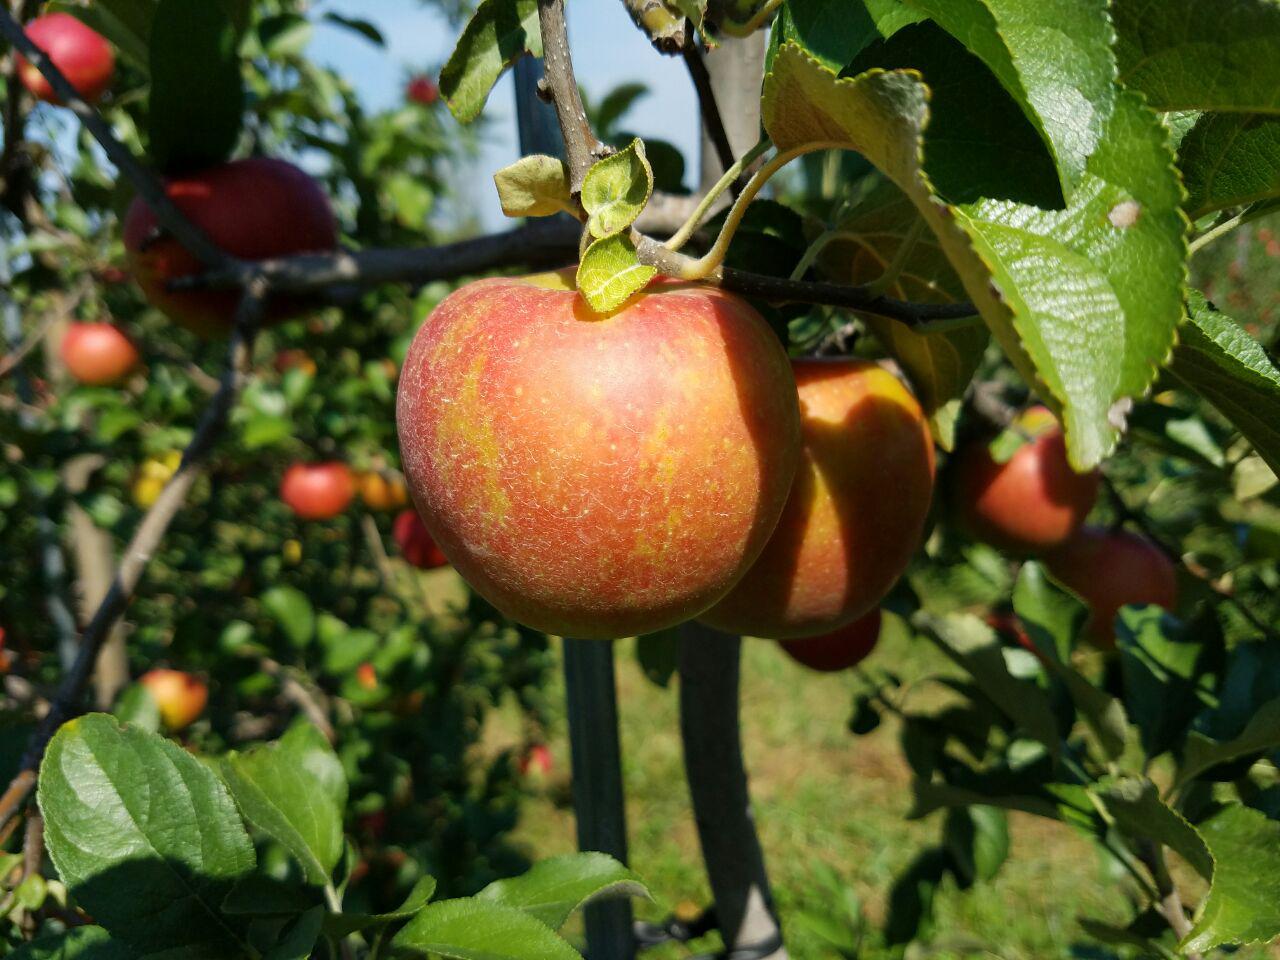 Apples waiting to be picked on a hot summer day in Poolesville, Maryland Photo by Geoffrey Nolasco (Eagle News Washington D.C. Bureau)